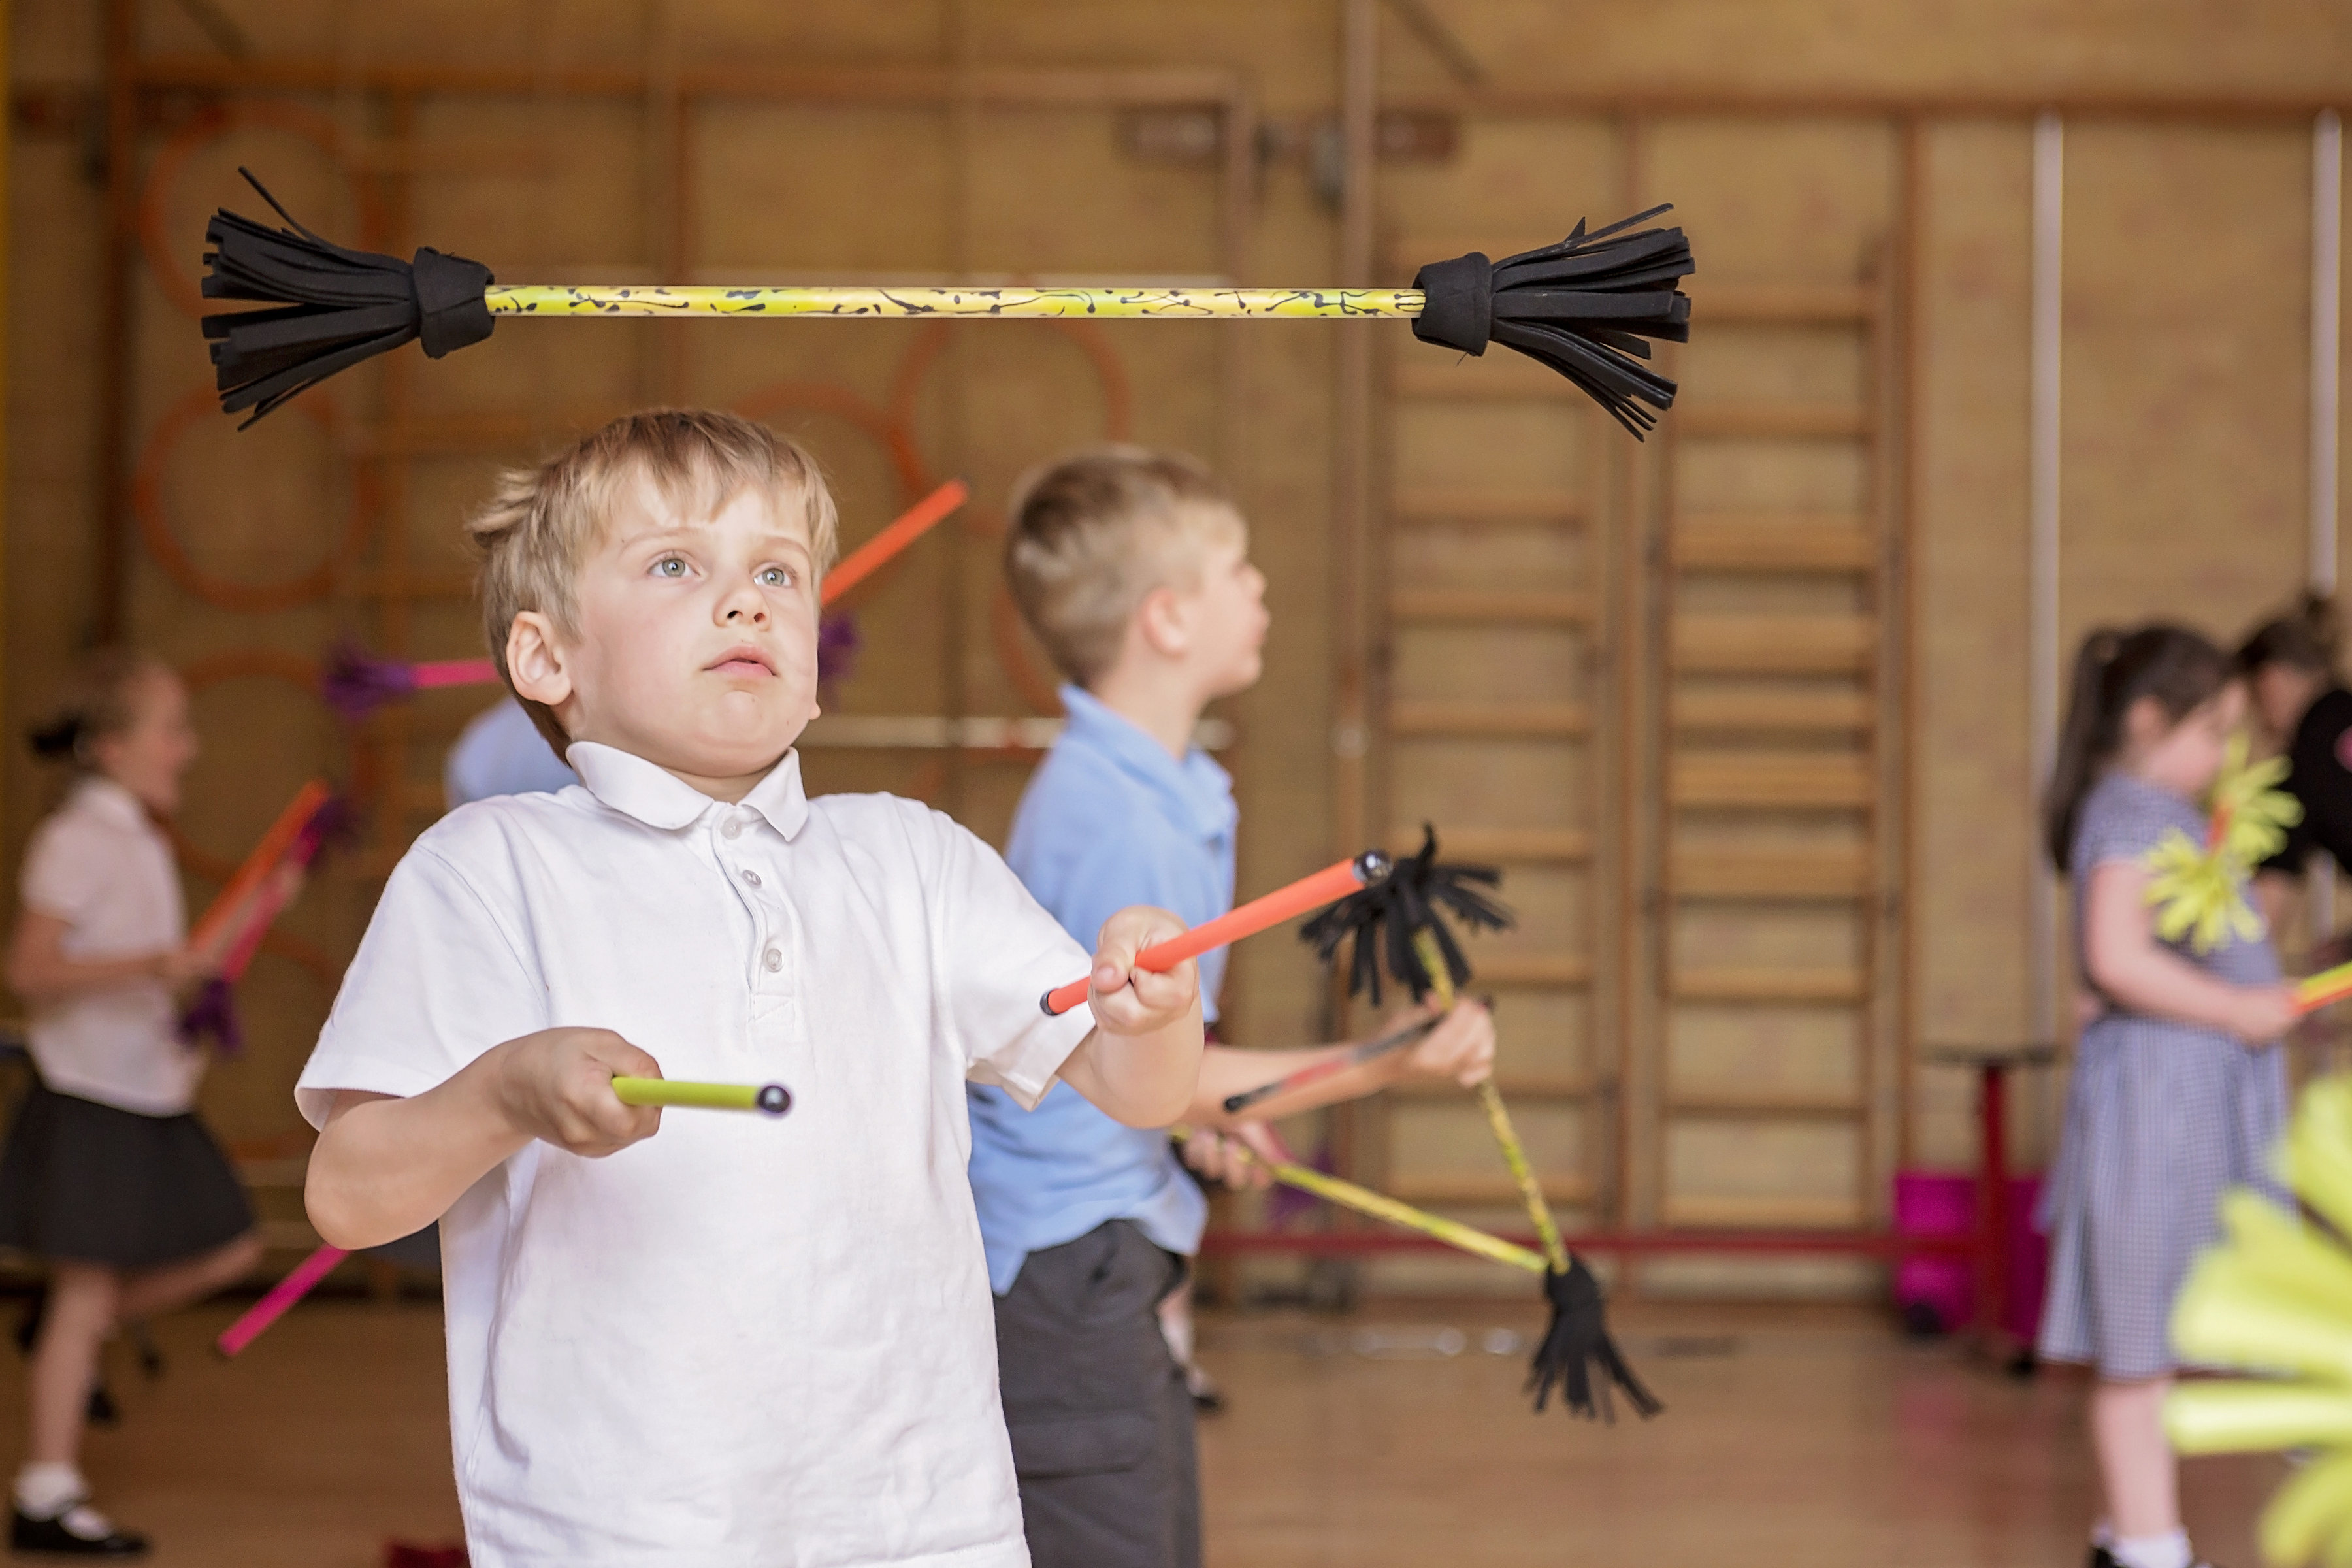 How does a circus skills workshop link with the curriculum?